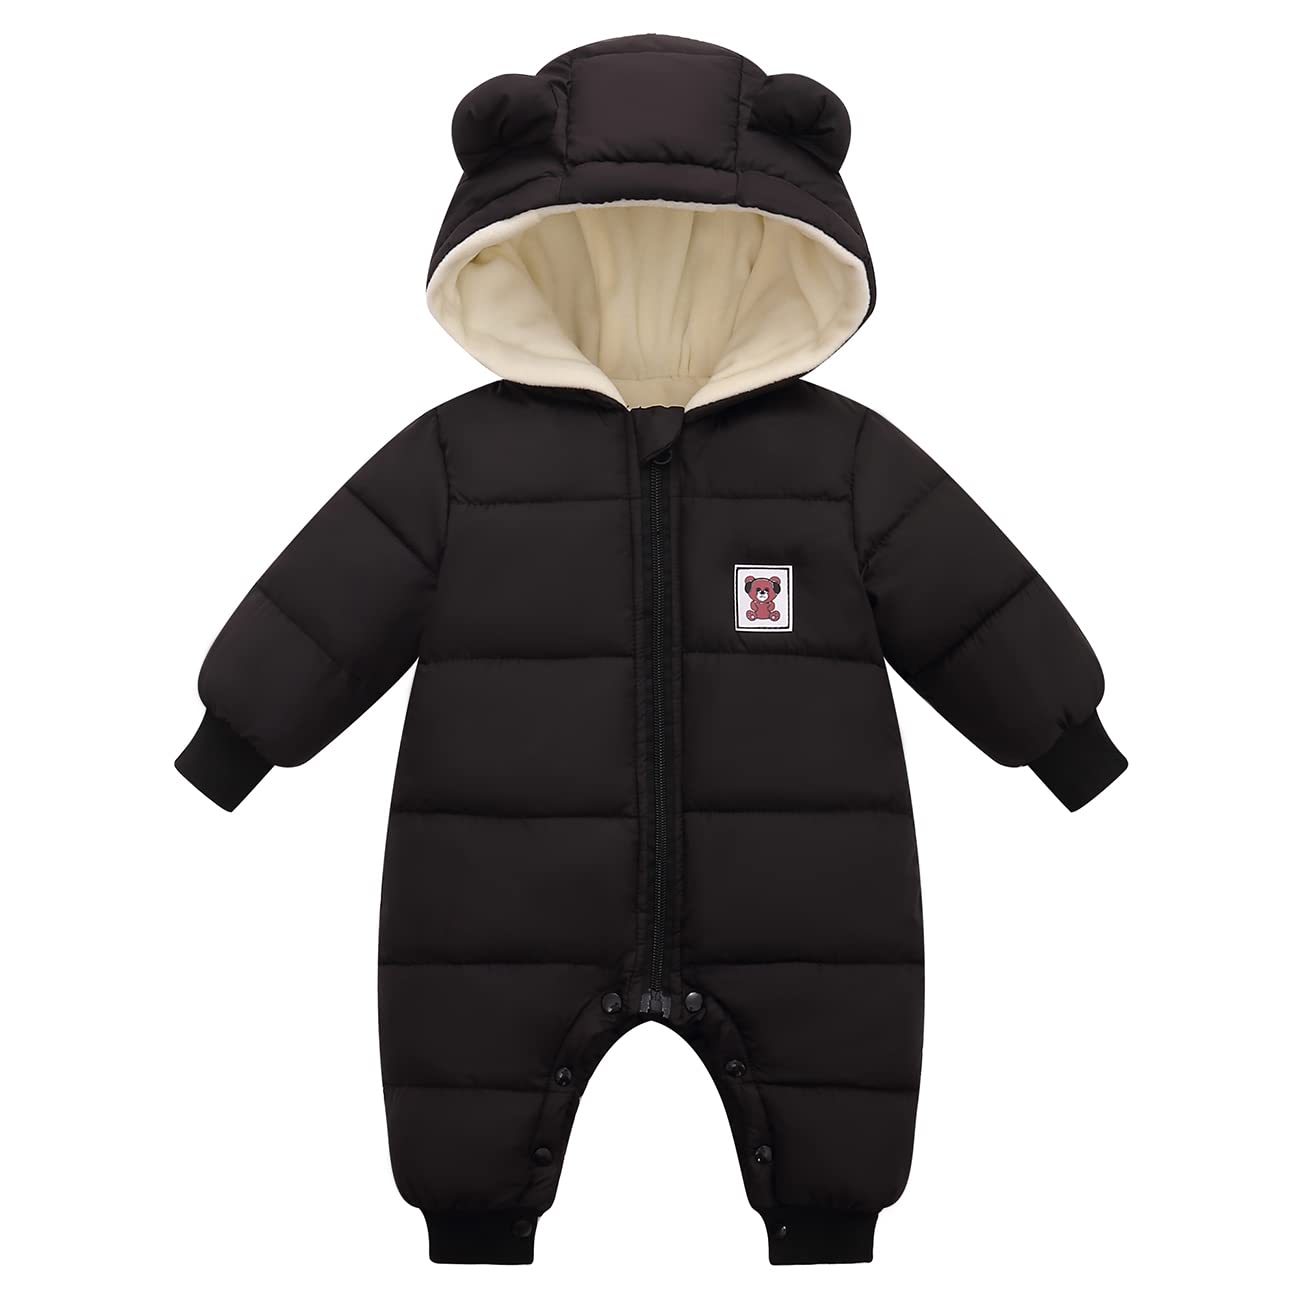 Fumdonnie Baby Boys Snowsuit Toddler Winter Girls Clothes Infant Coat 18-24 Months Jackets